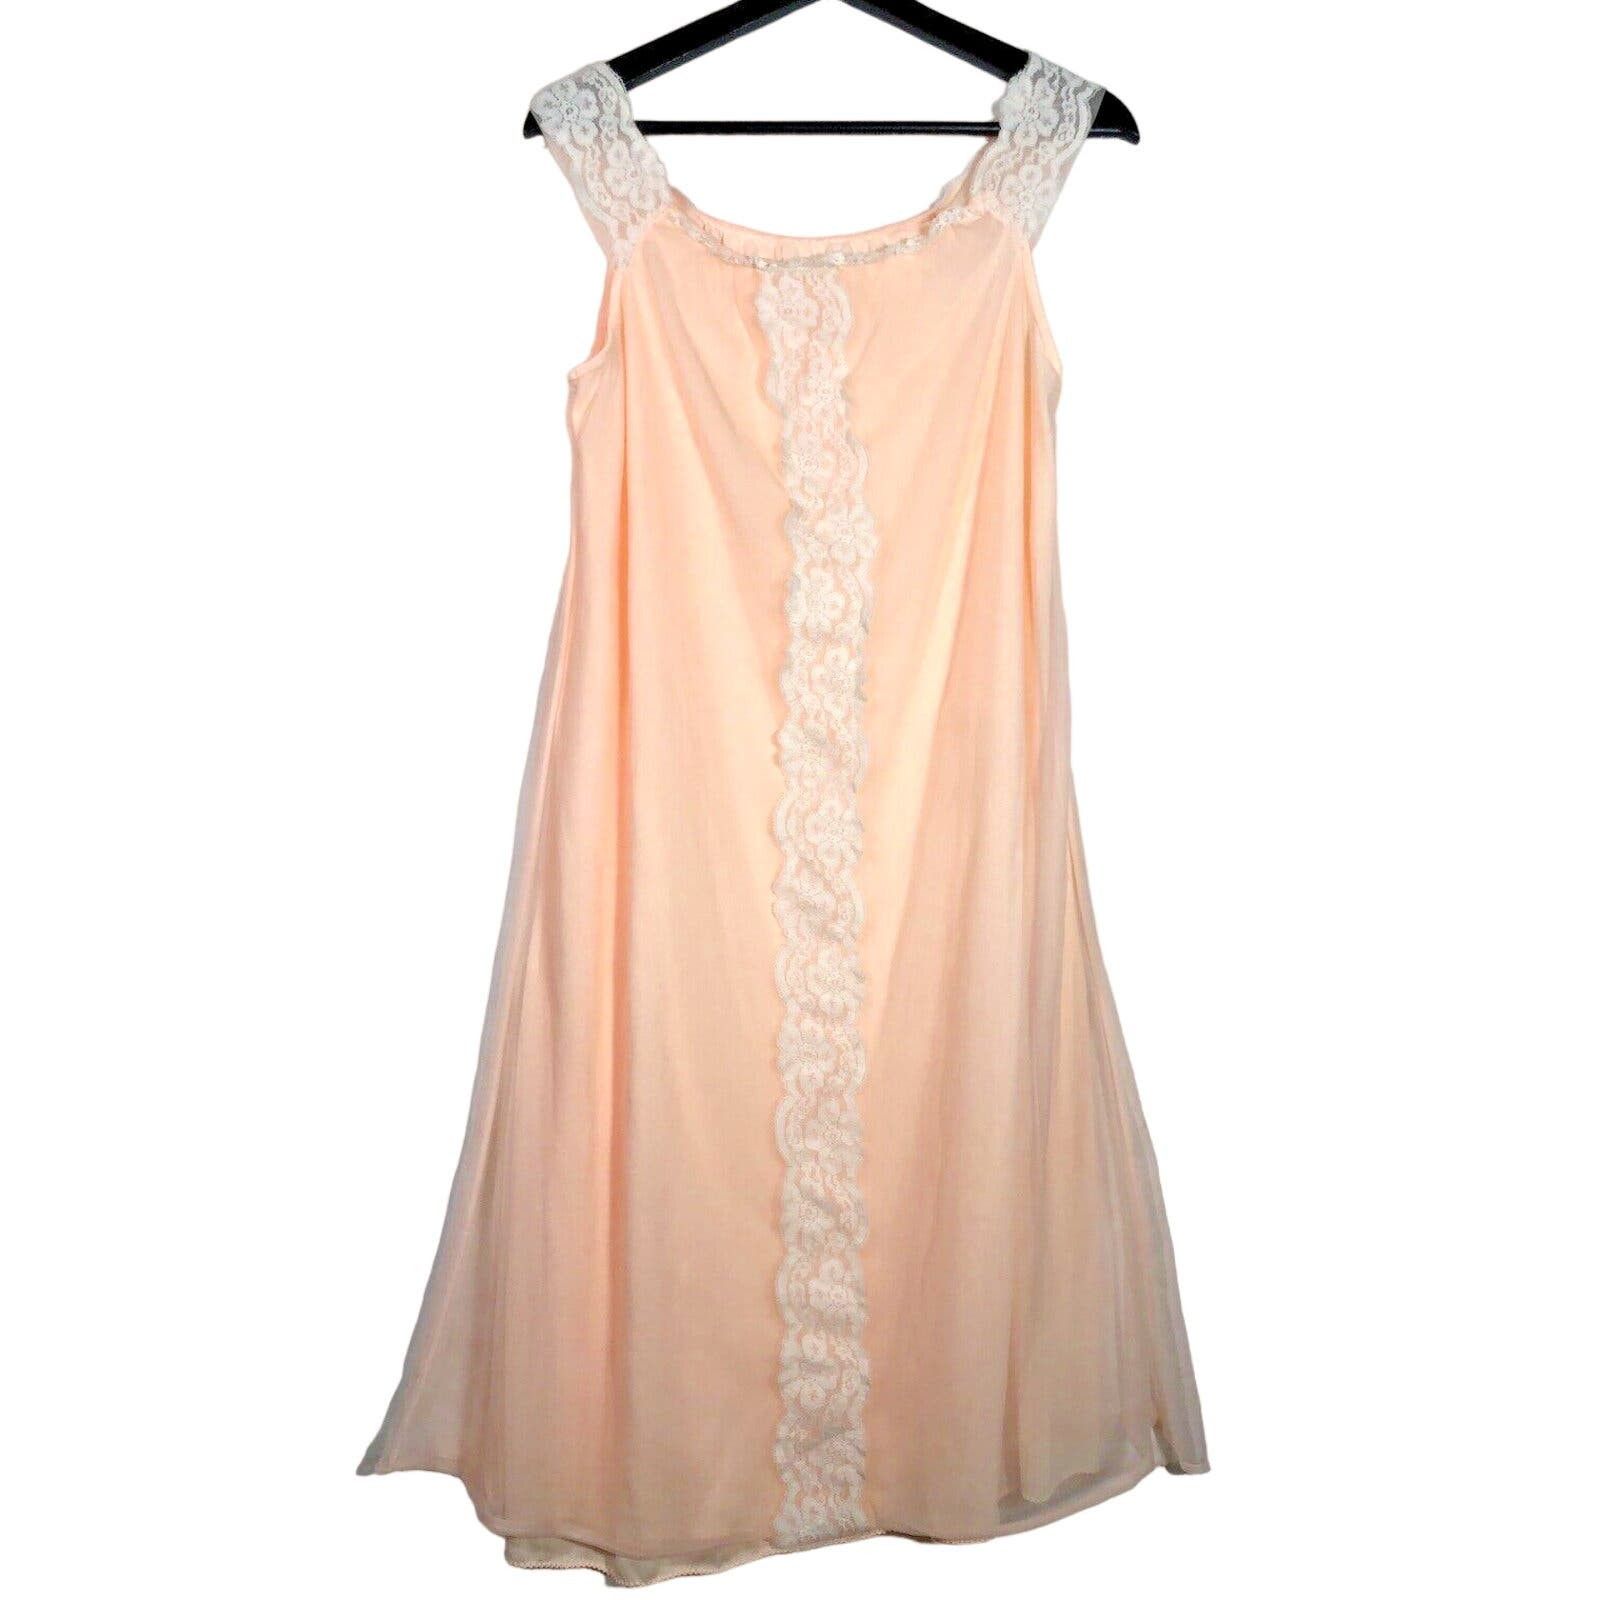 Vintage Vintage Peach and Pink Lace and Chiffon NightGown Dress S Size S / US 4 / IT 40 - 1 Preview